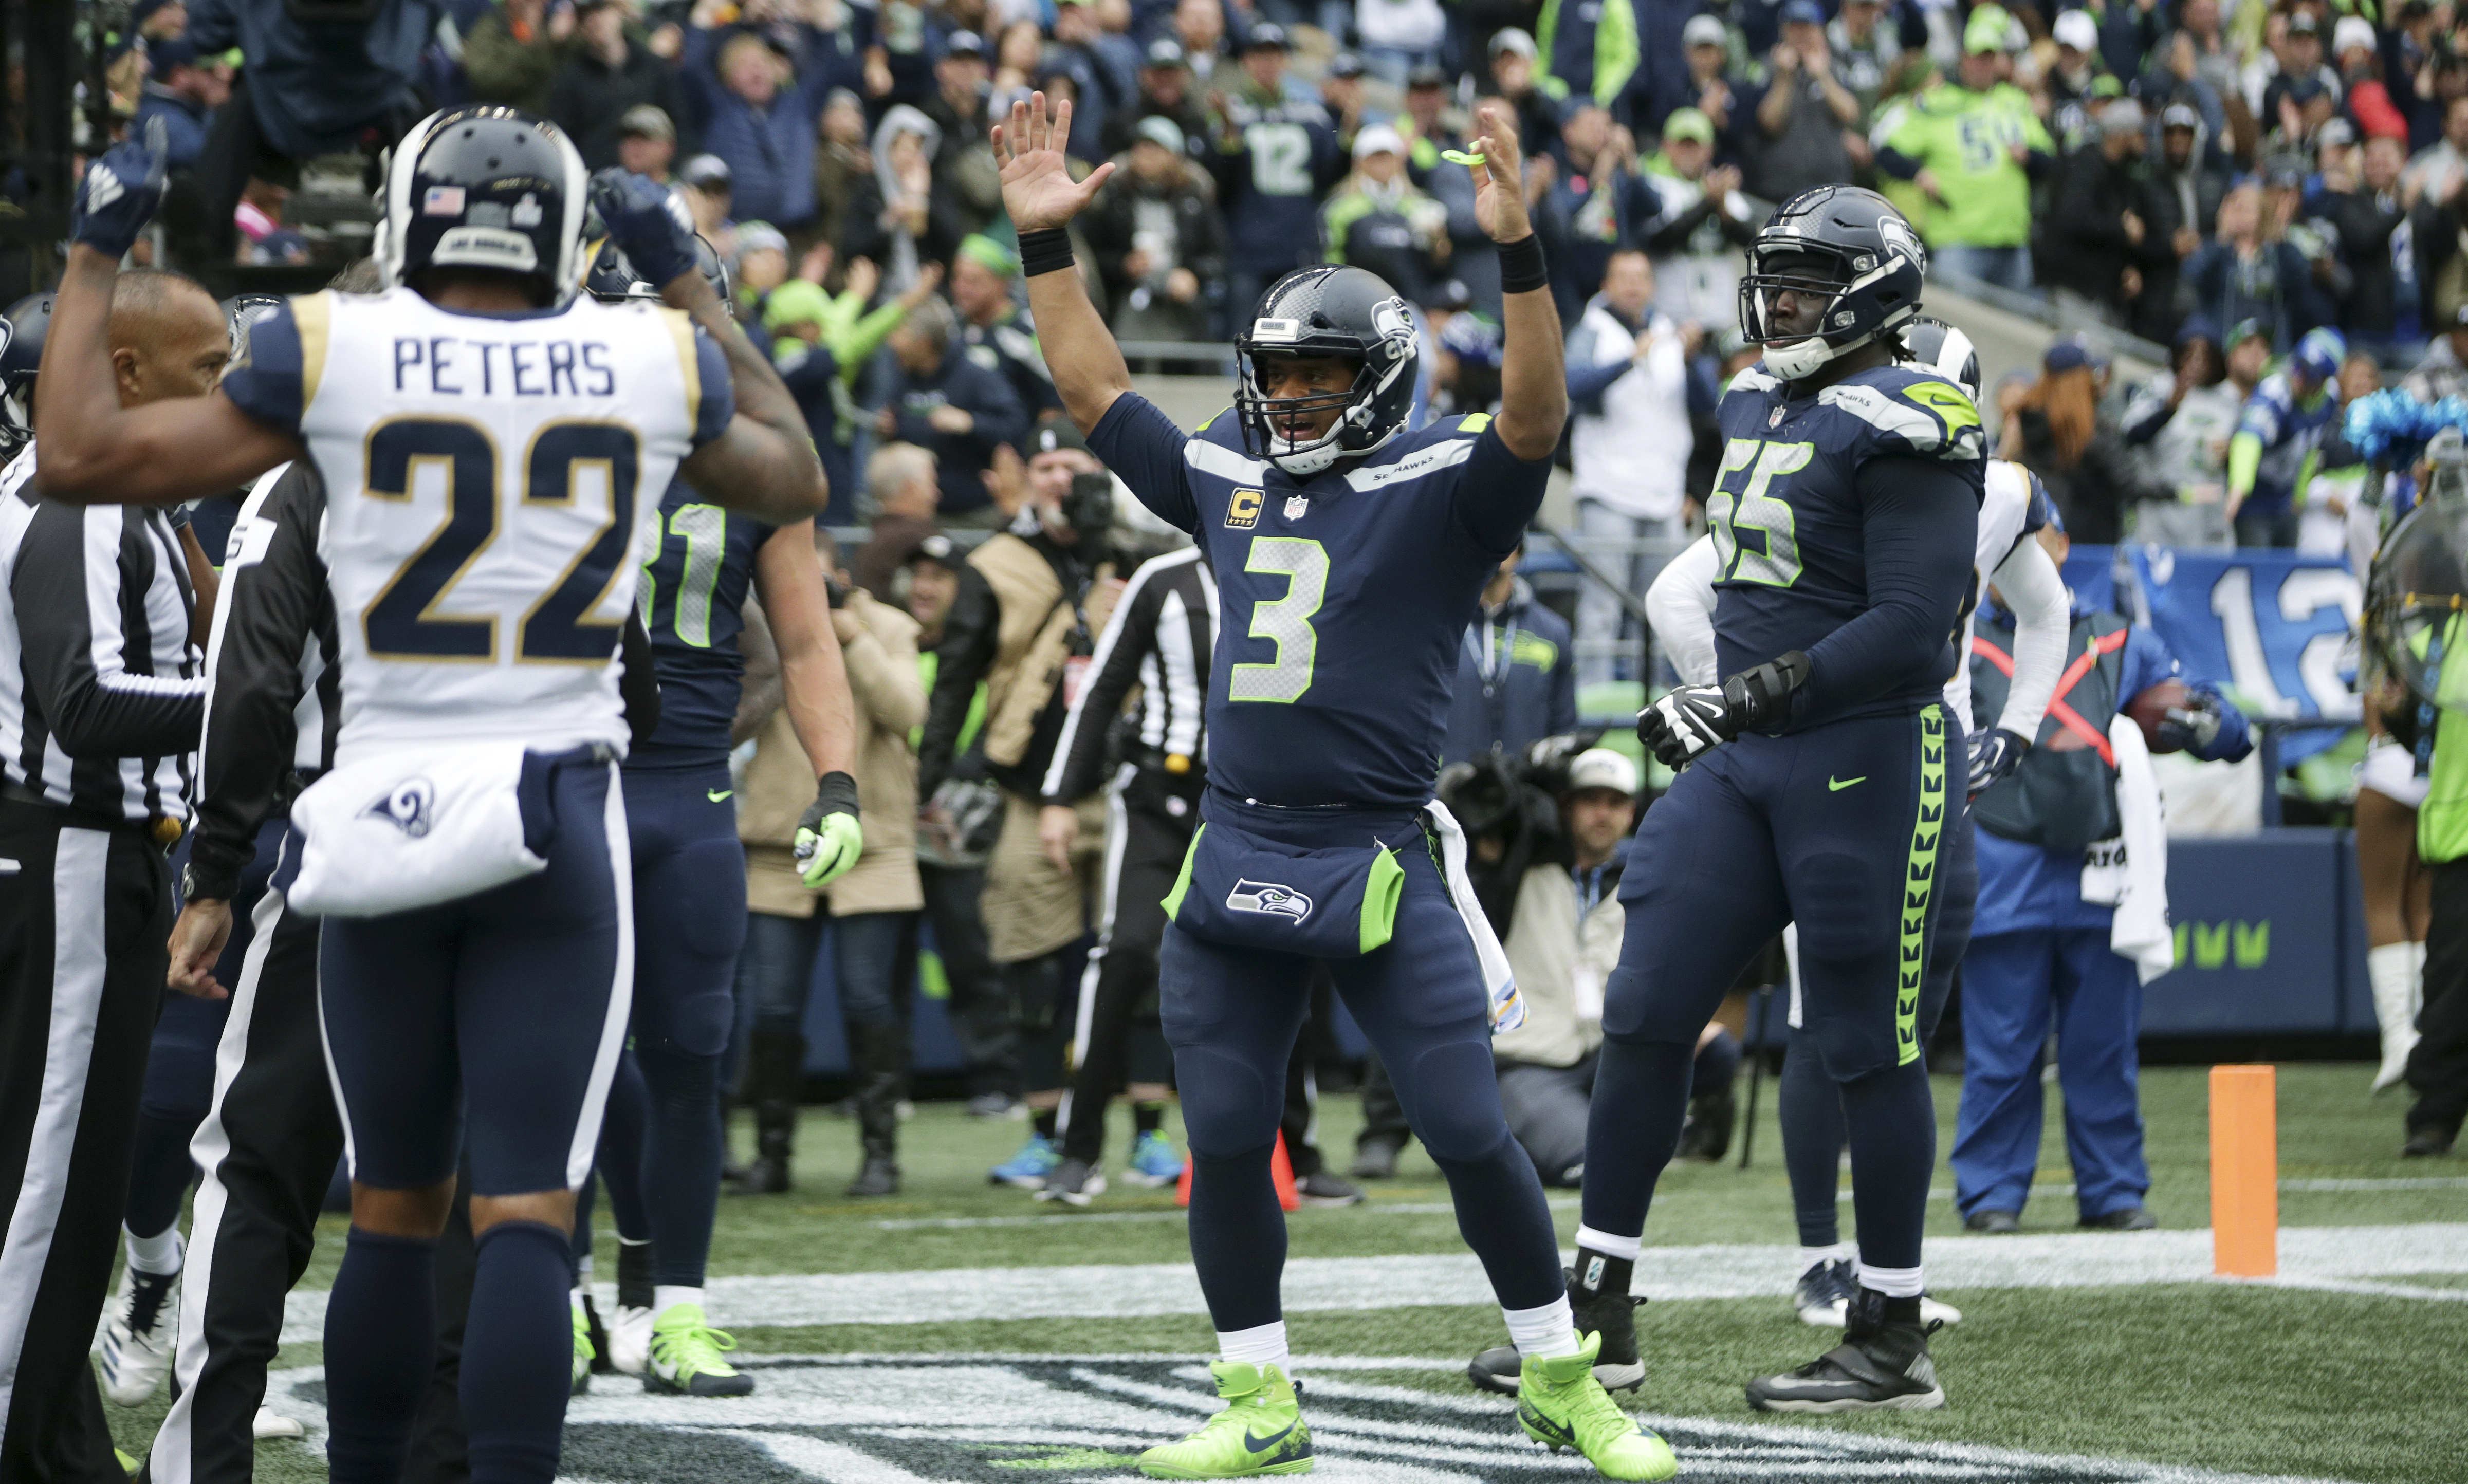 Gurley’s 3 TDs keep Rams perfect in 33-31 win over Seahawks